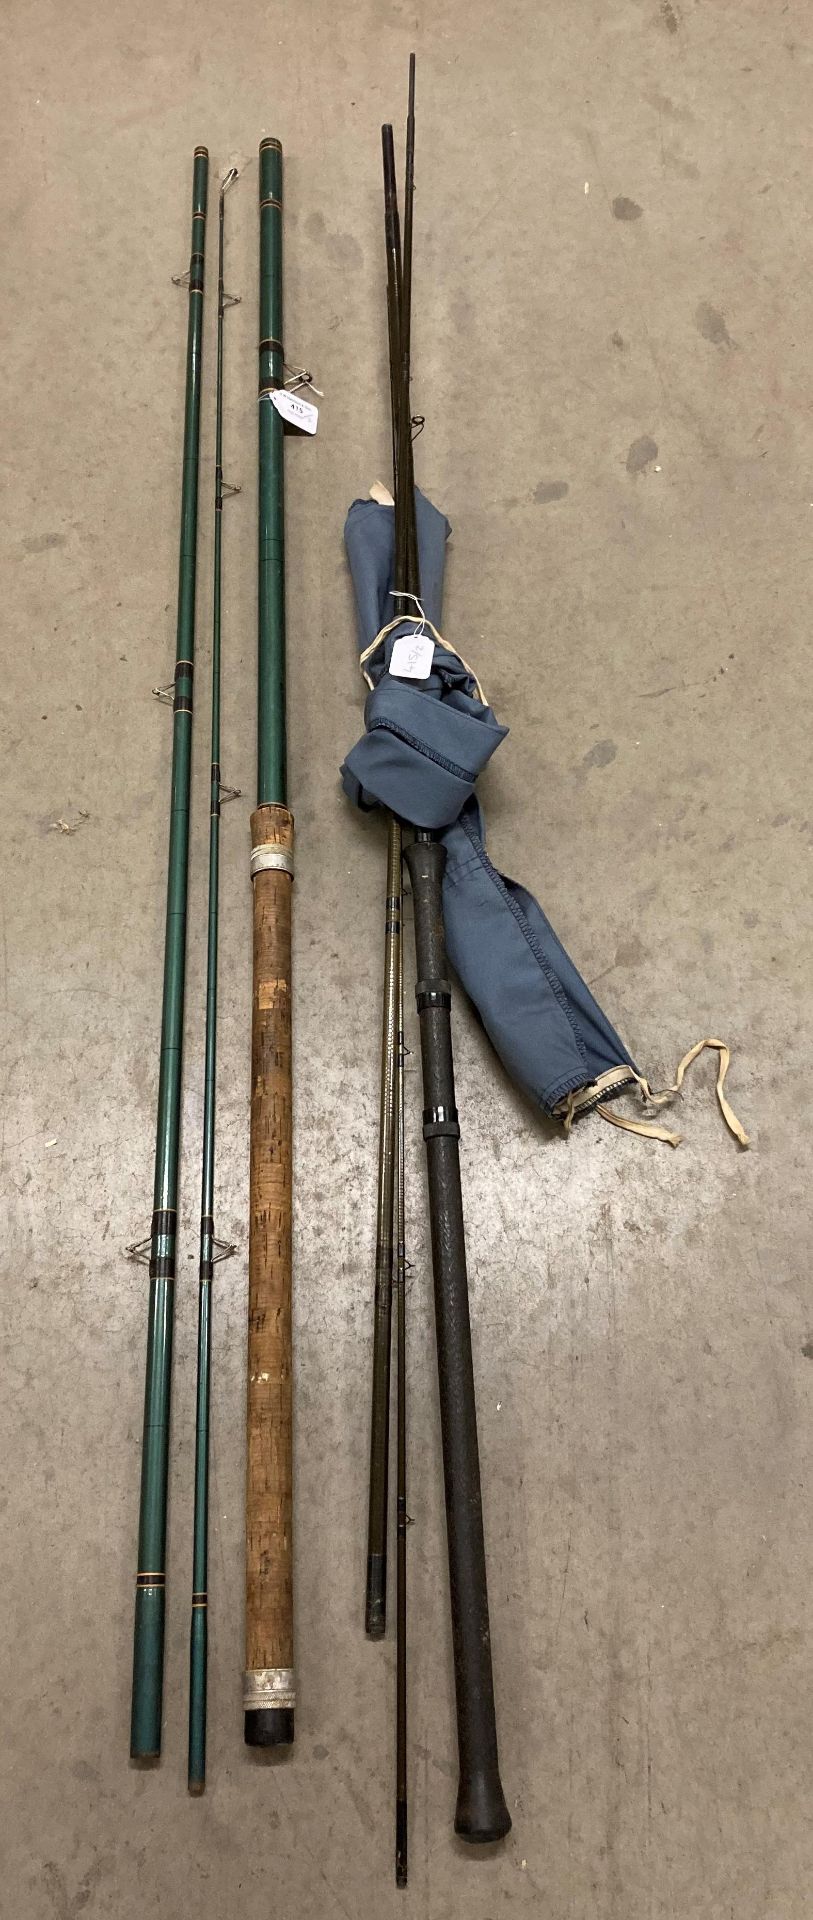 Two vintage rods - one Rodcraft 12" Match Mark II 3-piece (with bag) and a 3-piece Super Flex with